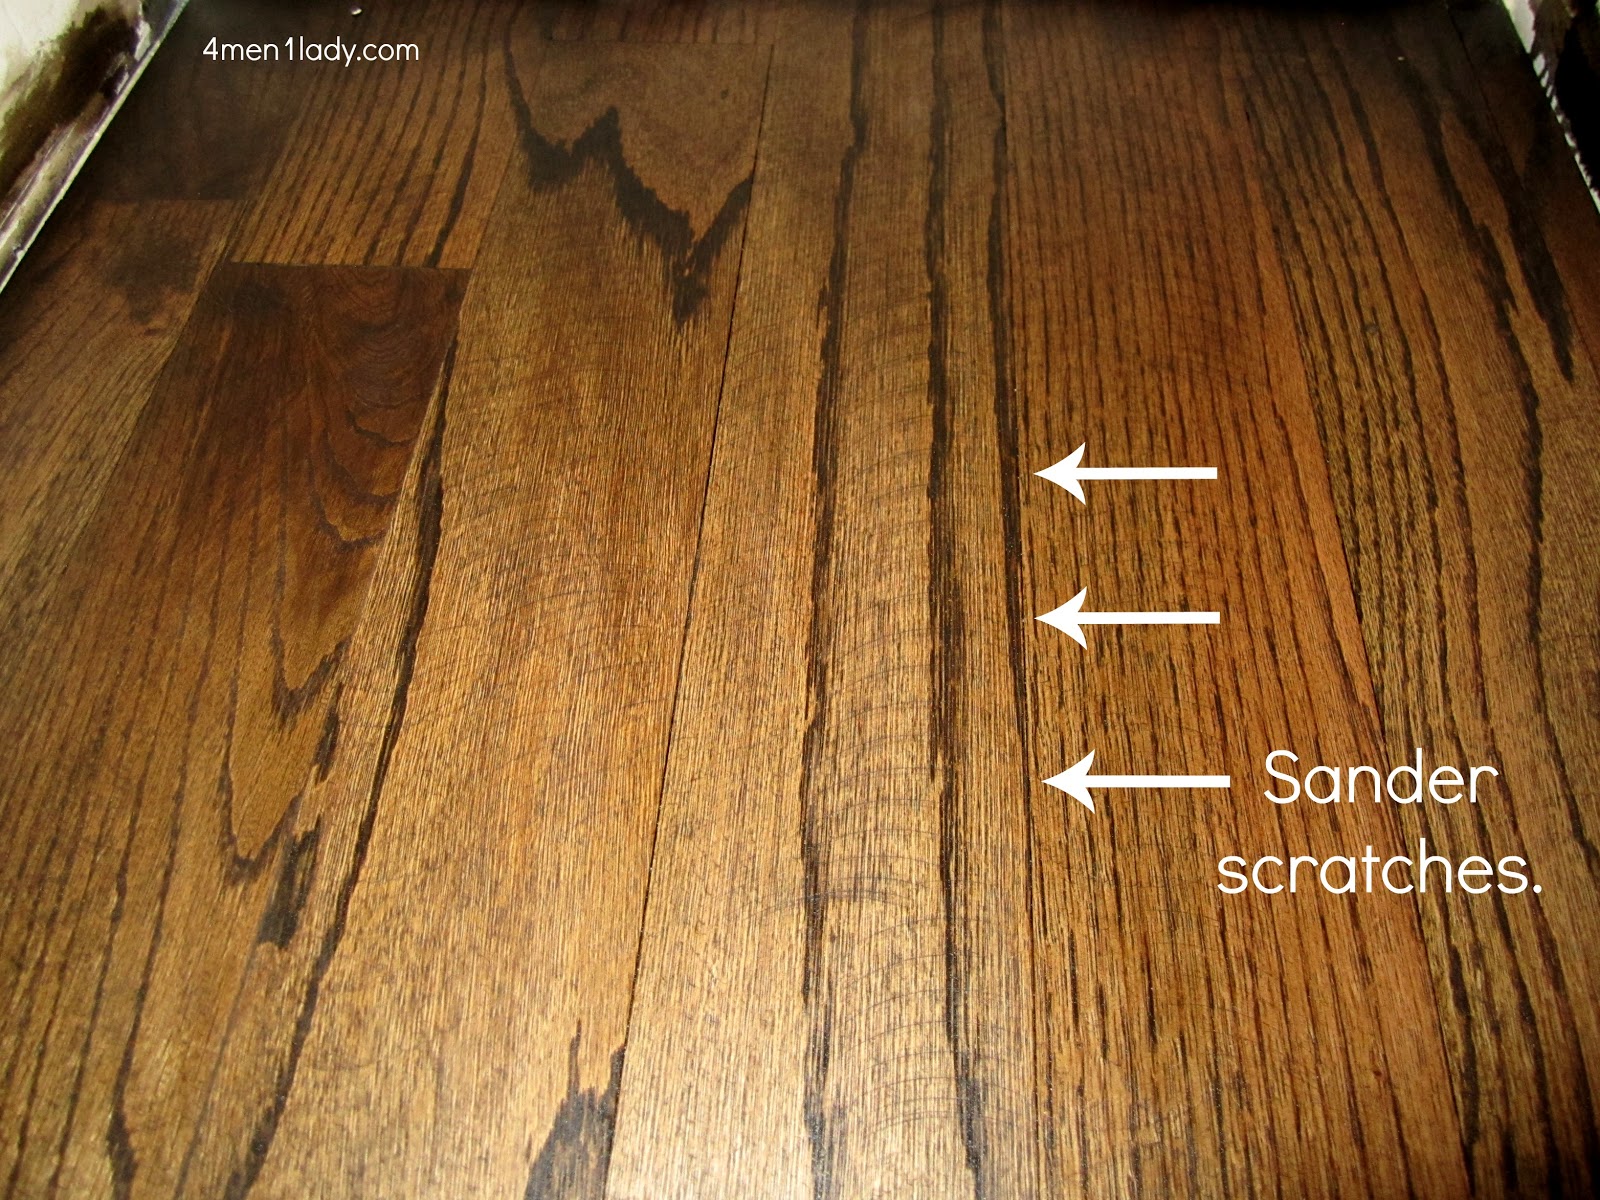 Hardwood flooring pros and cons.